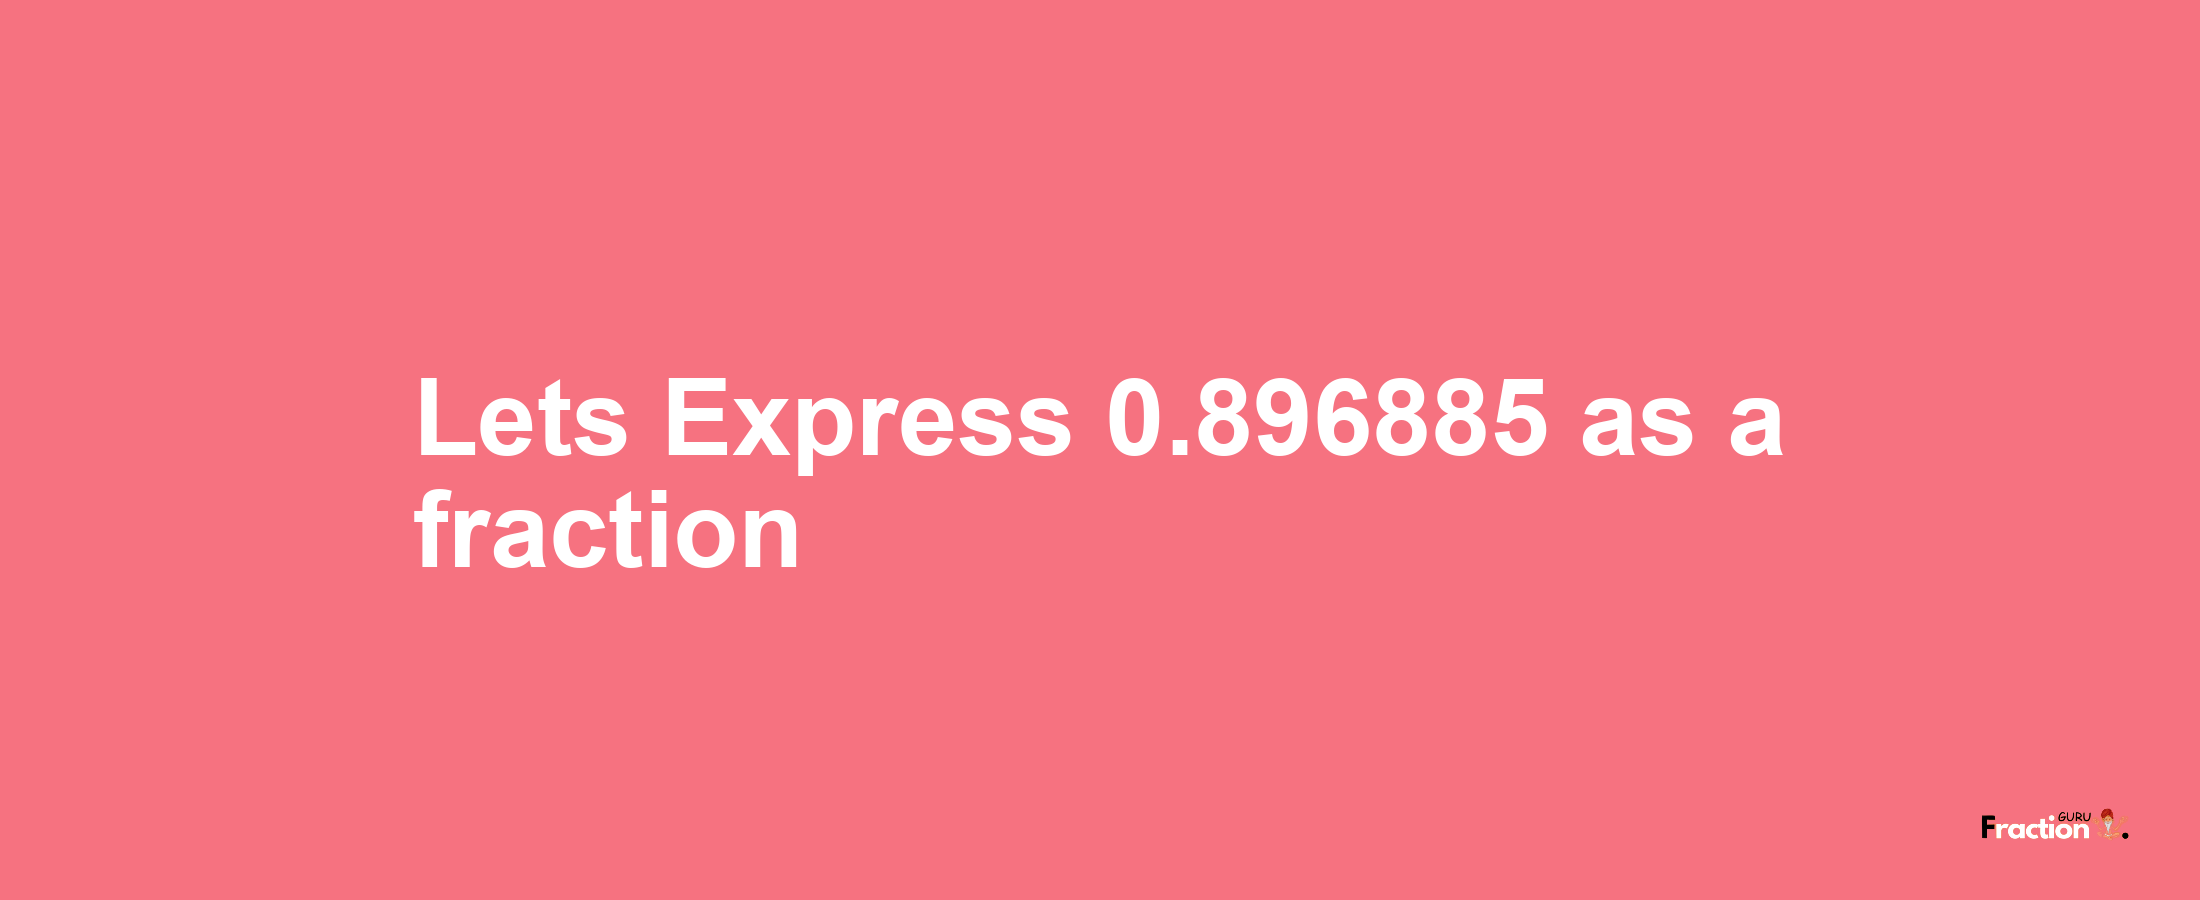 Lets Express 0.896885 as afraction